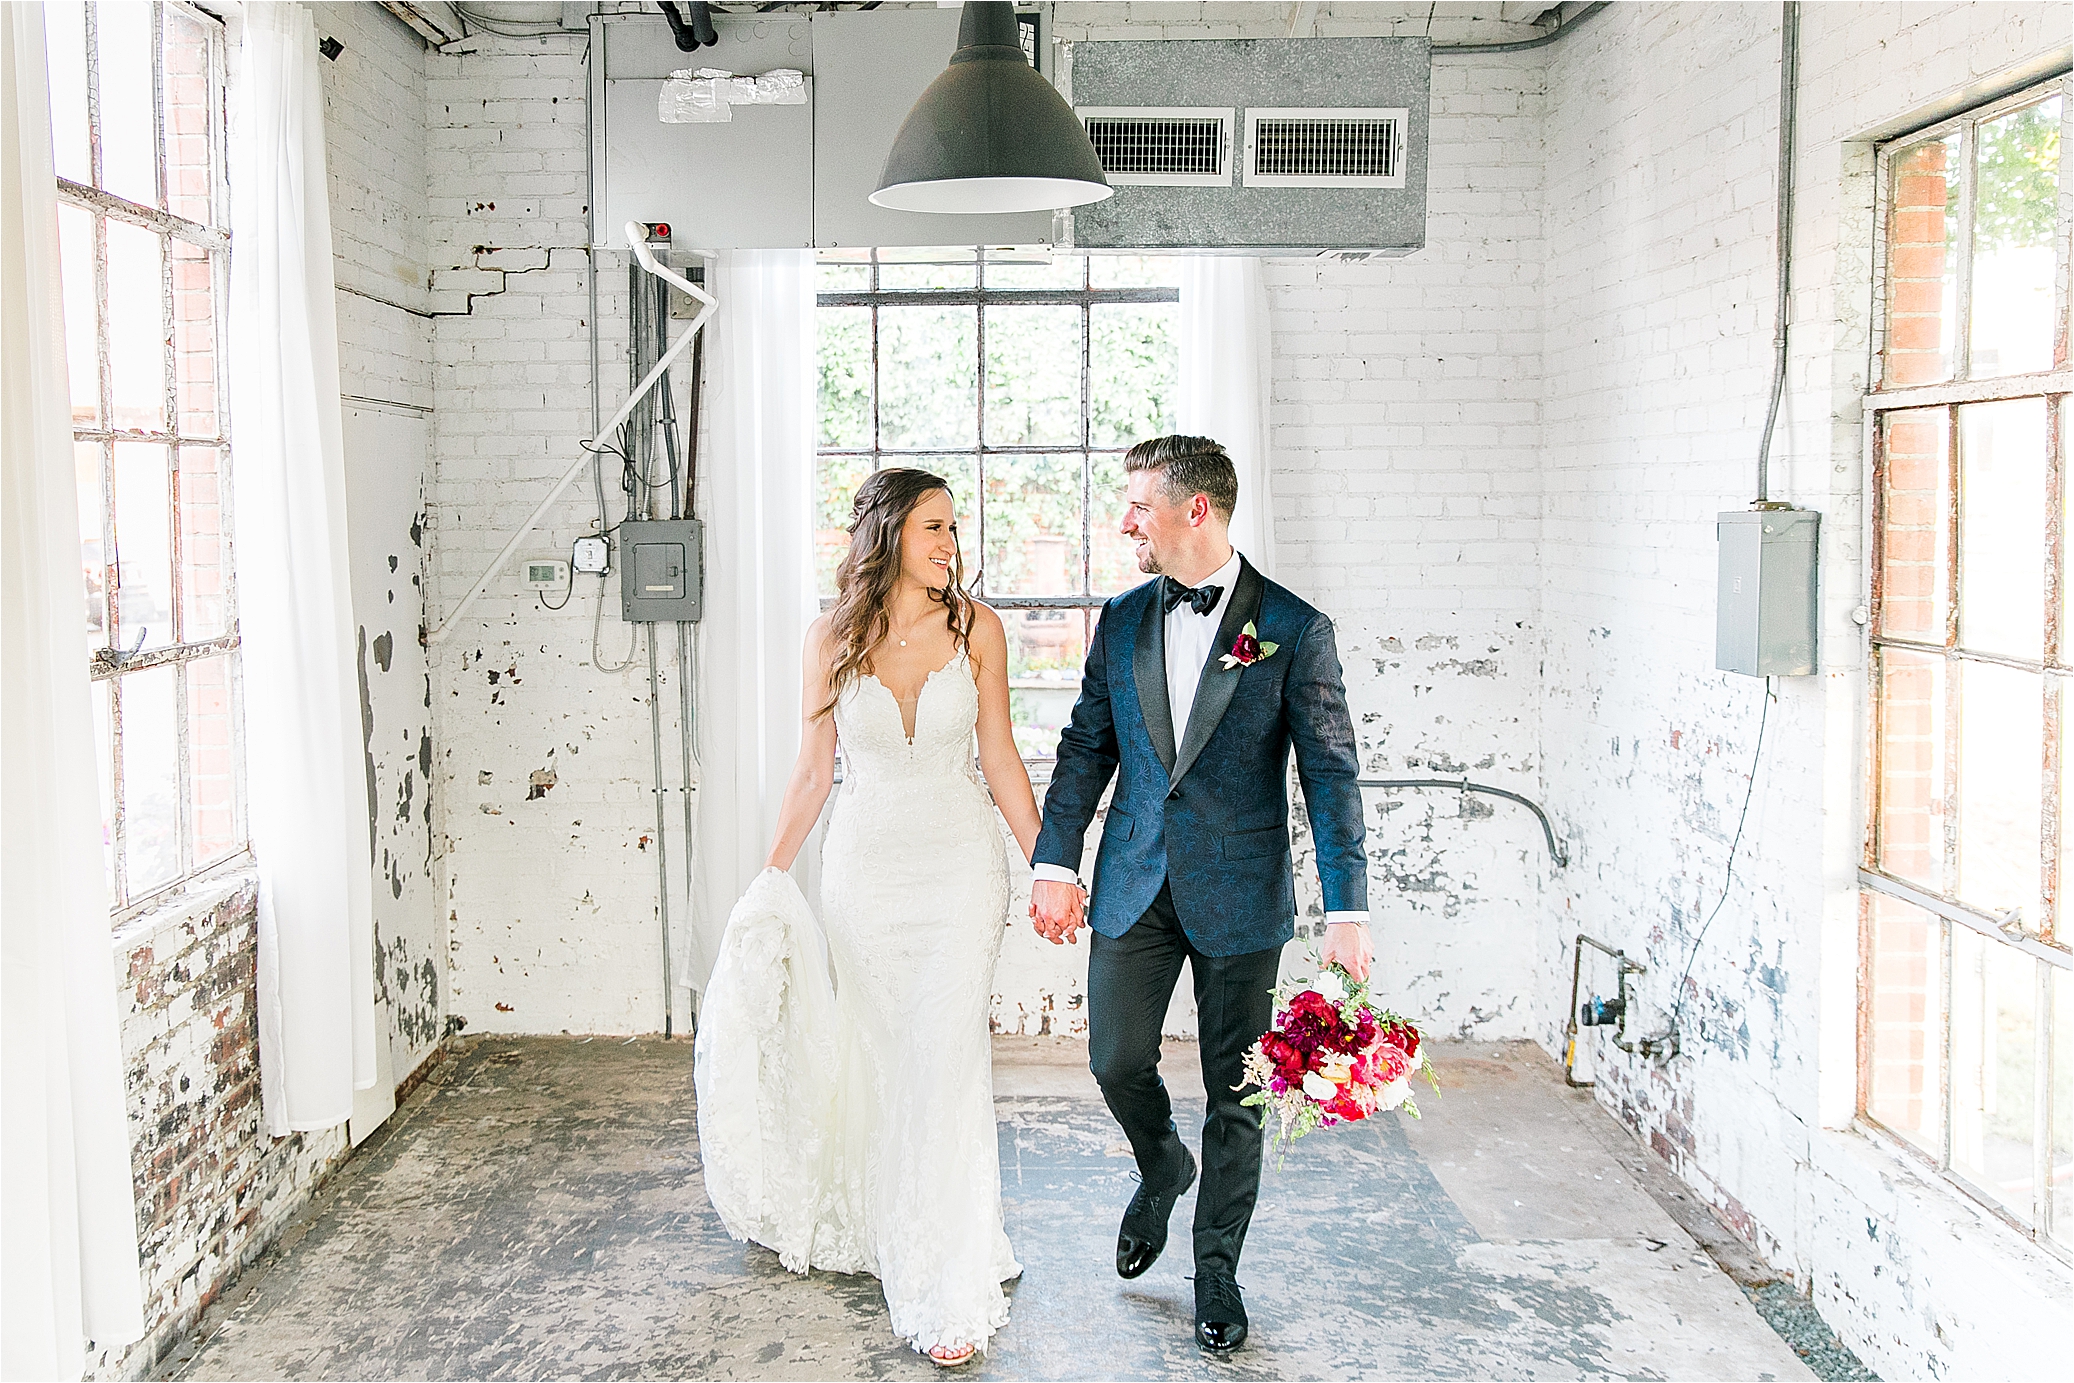 A newlywed couple smiles at each other and holds hands as they walk in a bright, brick building at HIckory Street Annex in Dallas, Texas